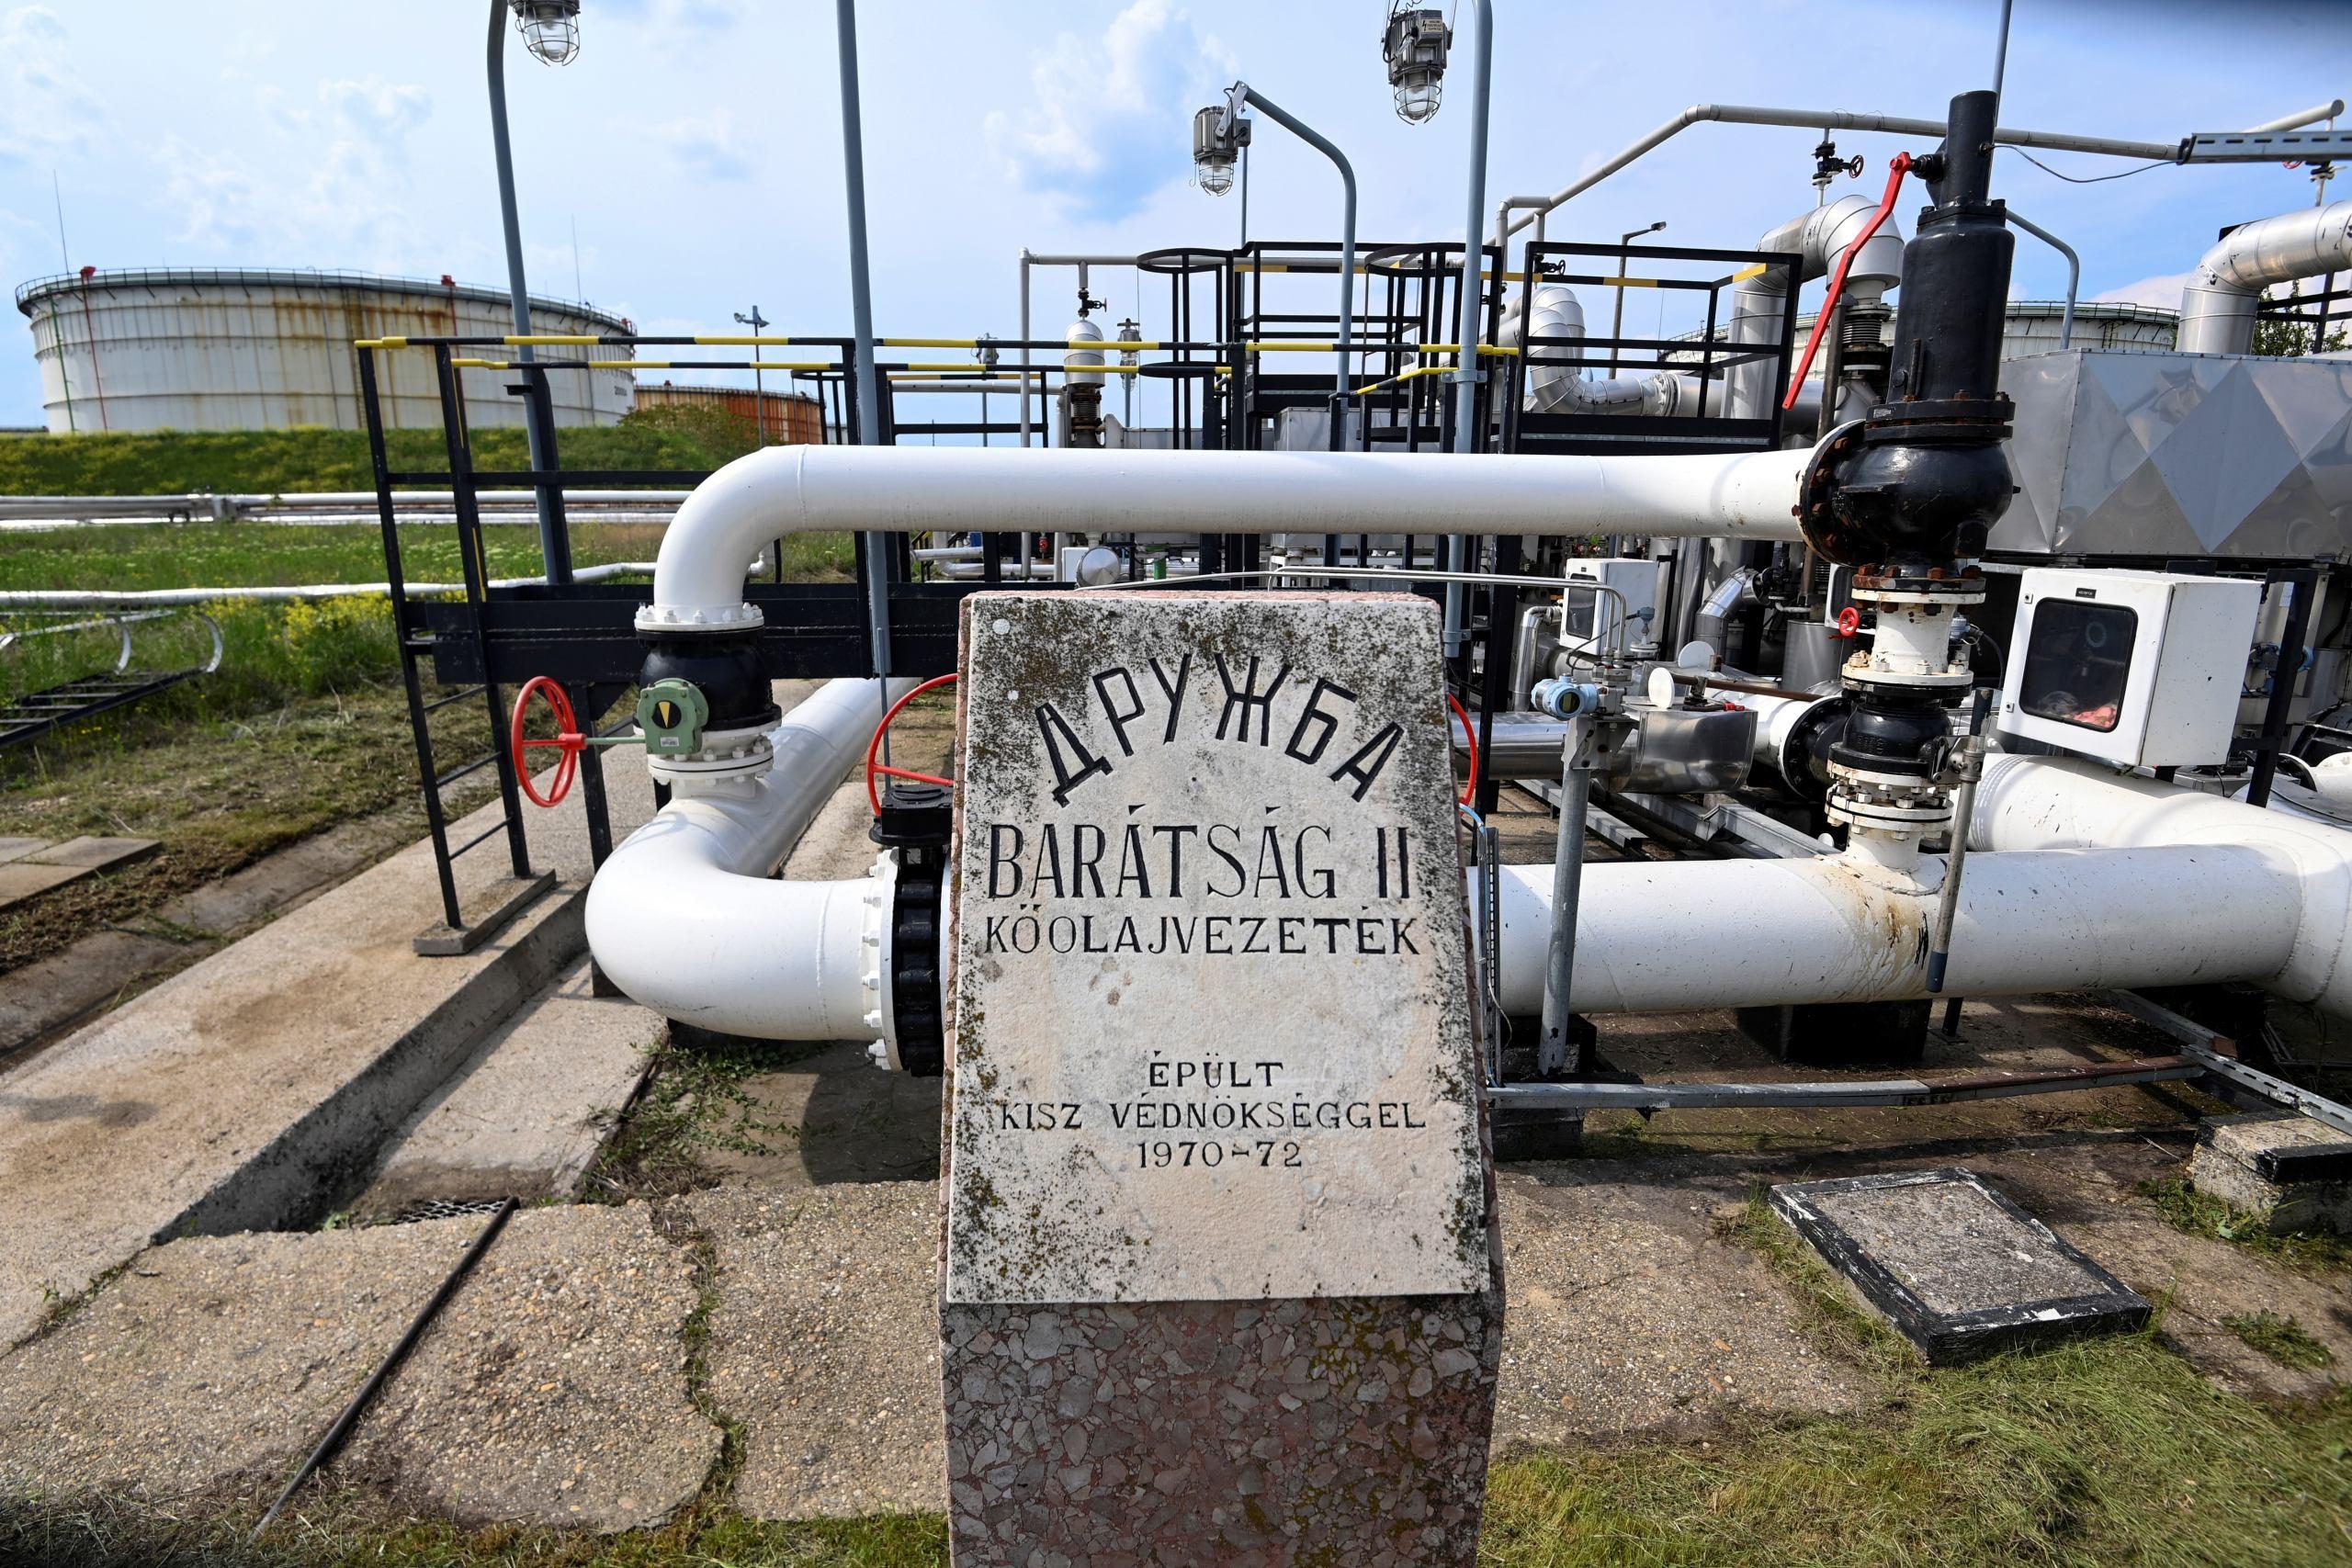 A photo taken on May 5, 2022 shows the receiver station of the Druzhba pipeline of petroleum between Hungary and Russia with a memorial plate of its construction at the Duna (Danube) Refinery of Hungarian MOL Company located near the town of Szazhalombatta, about 30 km south of Budapest. - Europe faces the prospect of a diesel supply shortage following sanctions on Russia. MOL's Duna Refinery continues to receive Russian crude through the Druzhba pipeline. (Photo by ATTILA KISBENEDEK / AFP)